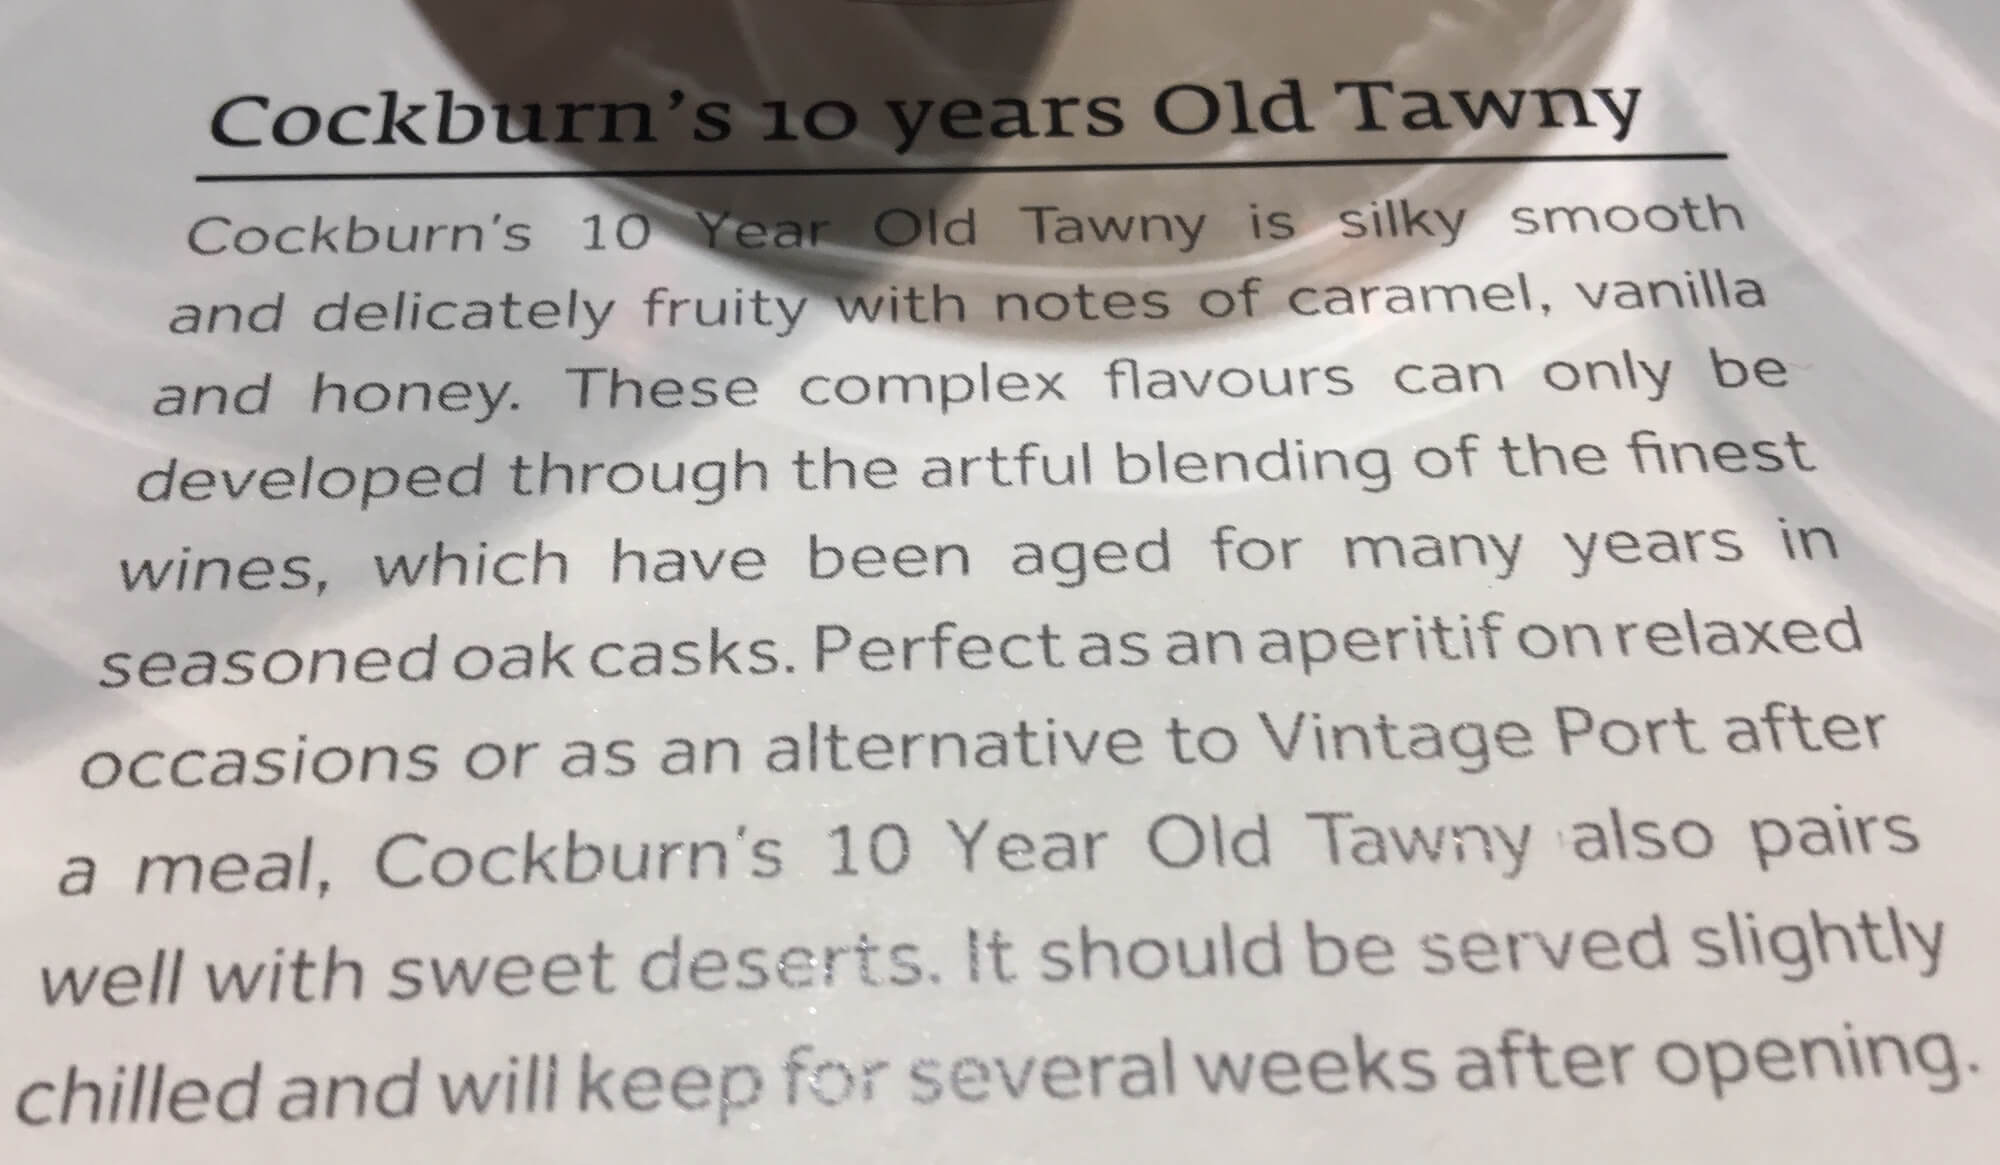 Tasting notes for Cockburn's 10 year old Tawny